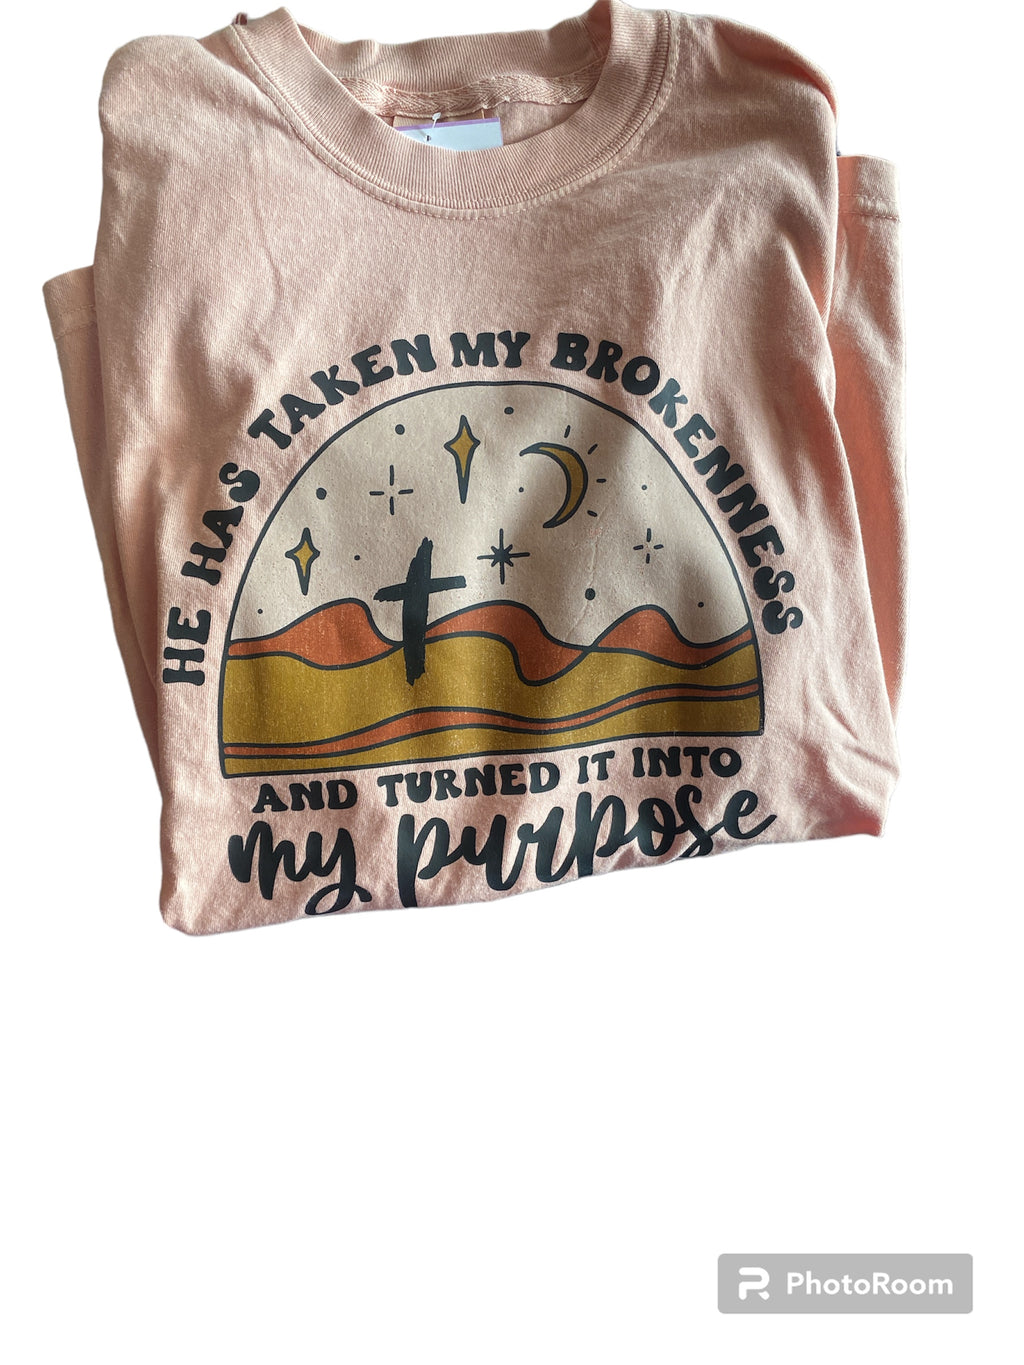 Simply You "He has taken my brokenness, and turned it into my purpose" Tee